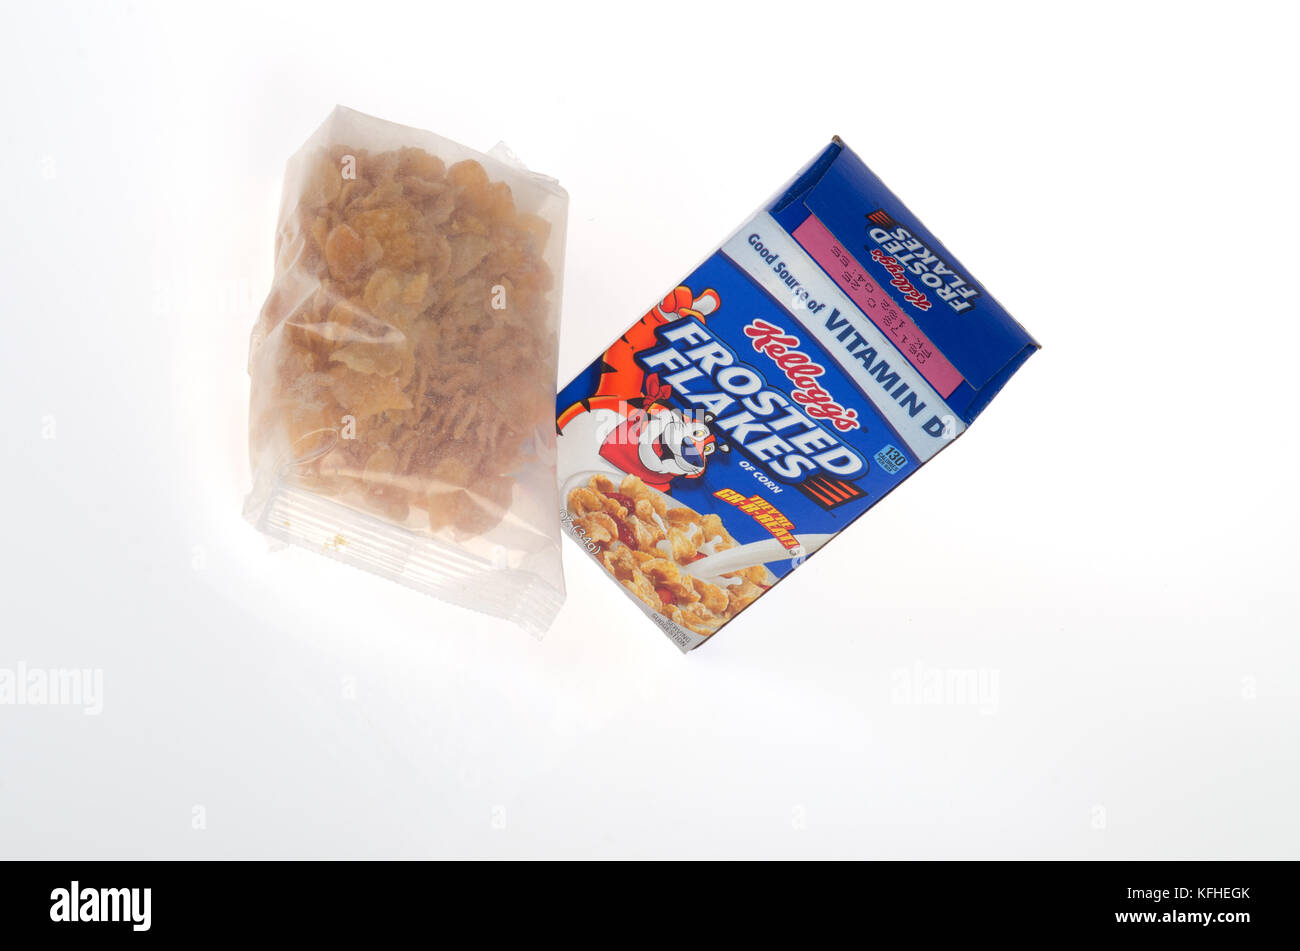 Kellogg's Frosted Flakes cereal box and bag Stock Photo - Alamy